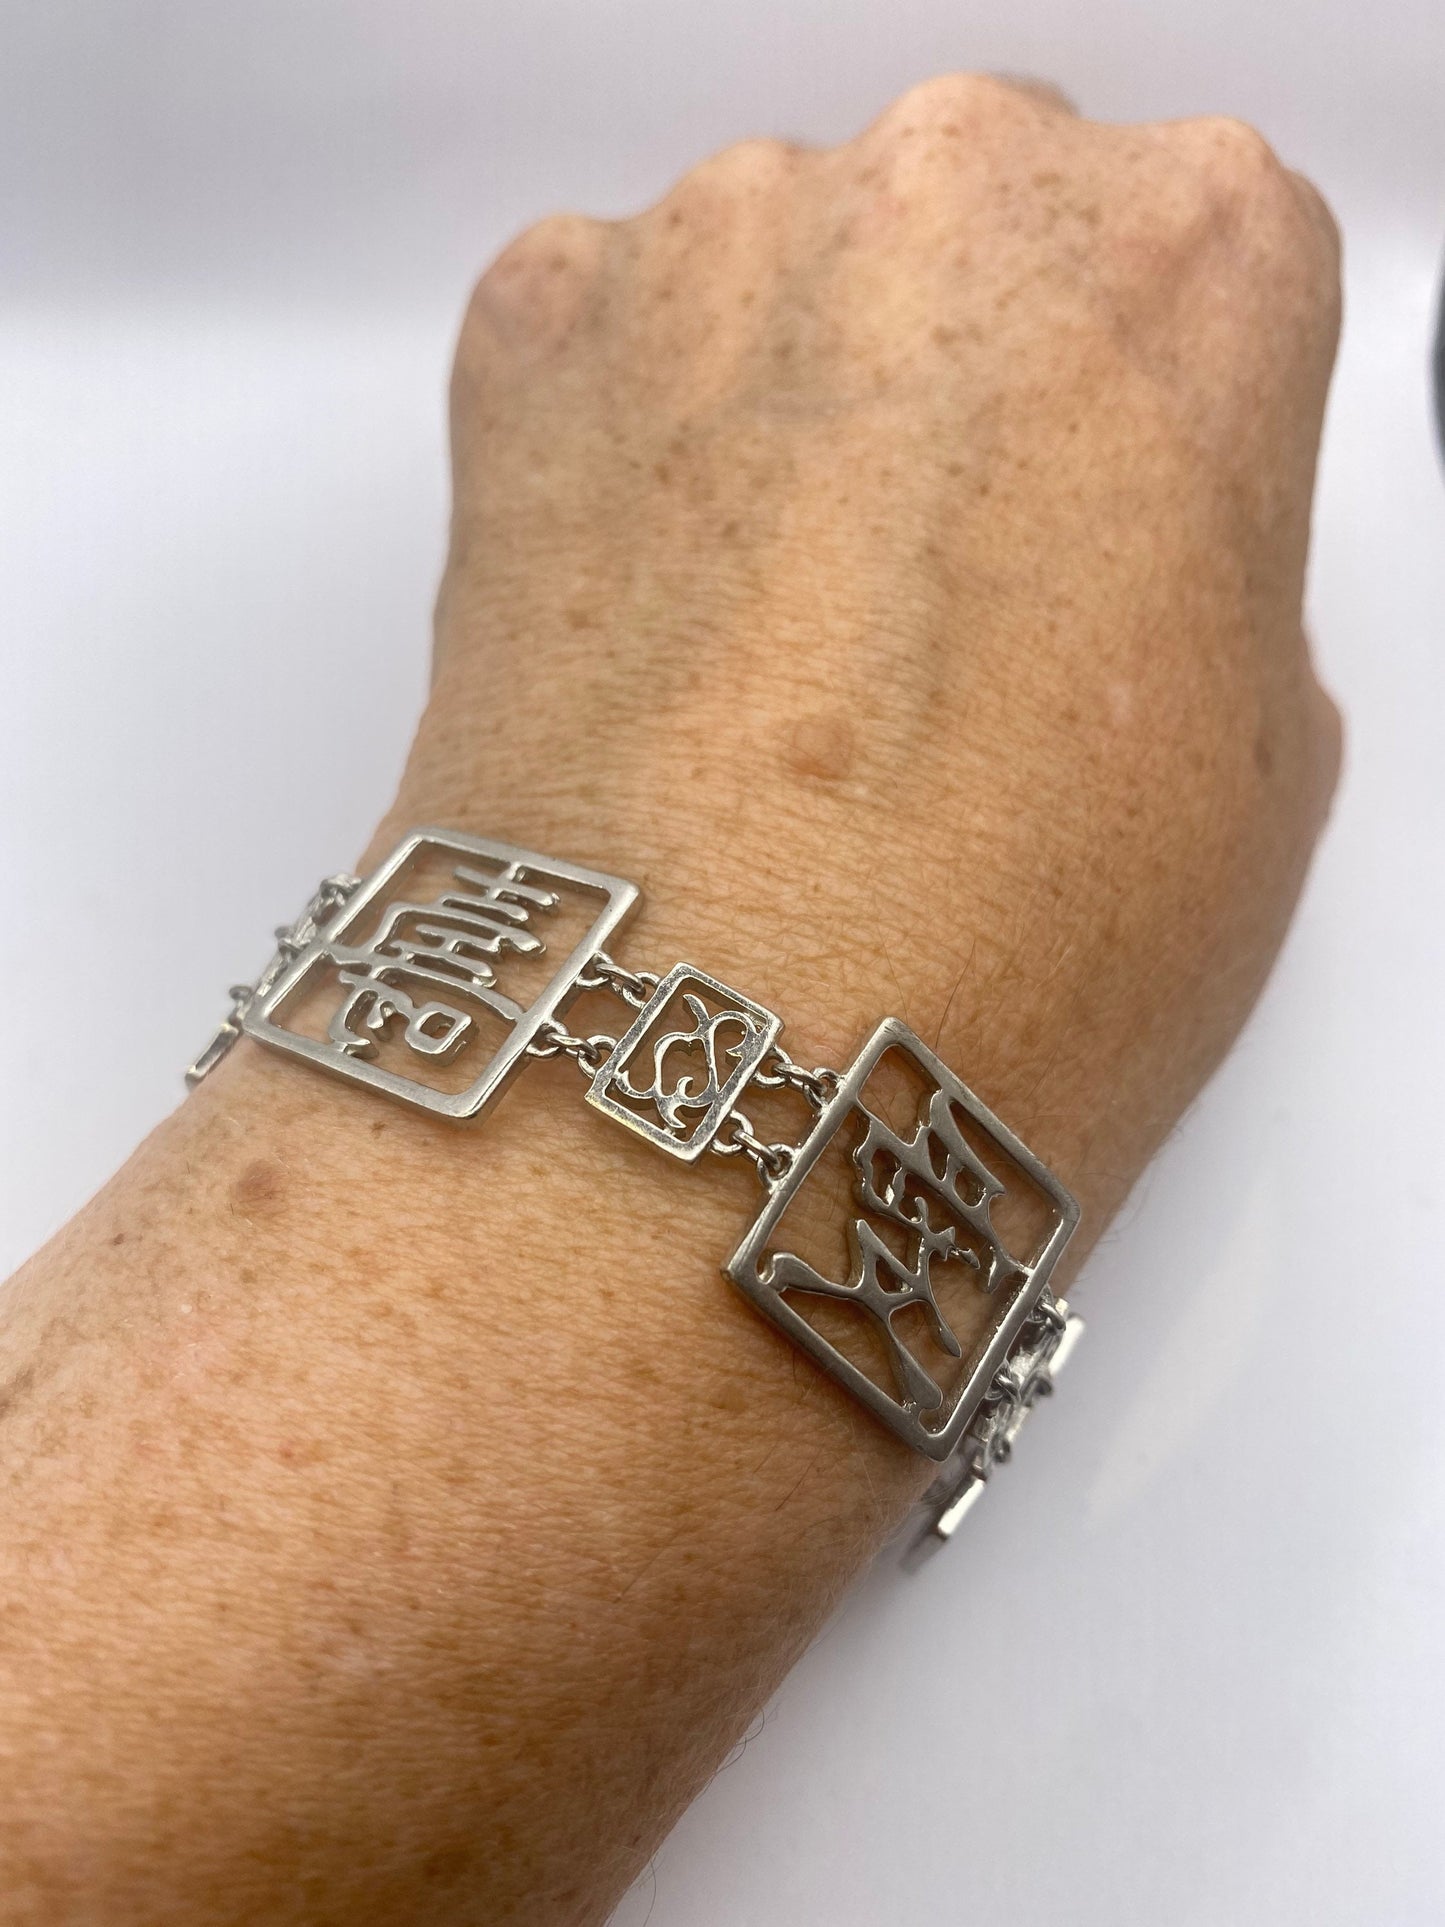 Vintage 925 Sterling Silver Filigree Lucky Chinese Calligraphy Bracelet